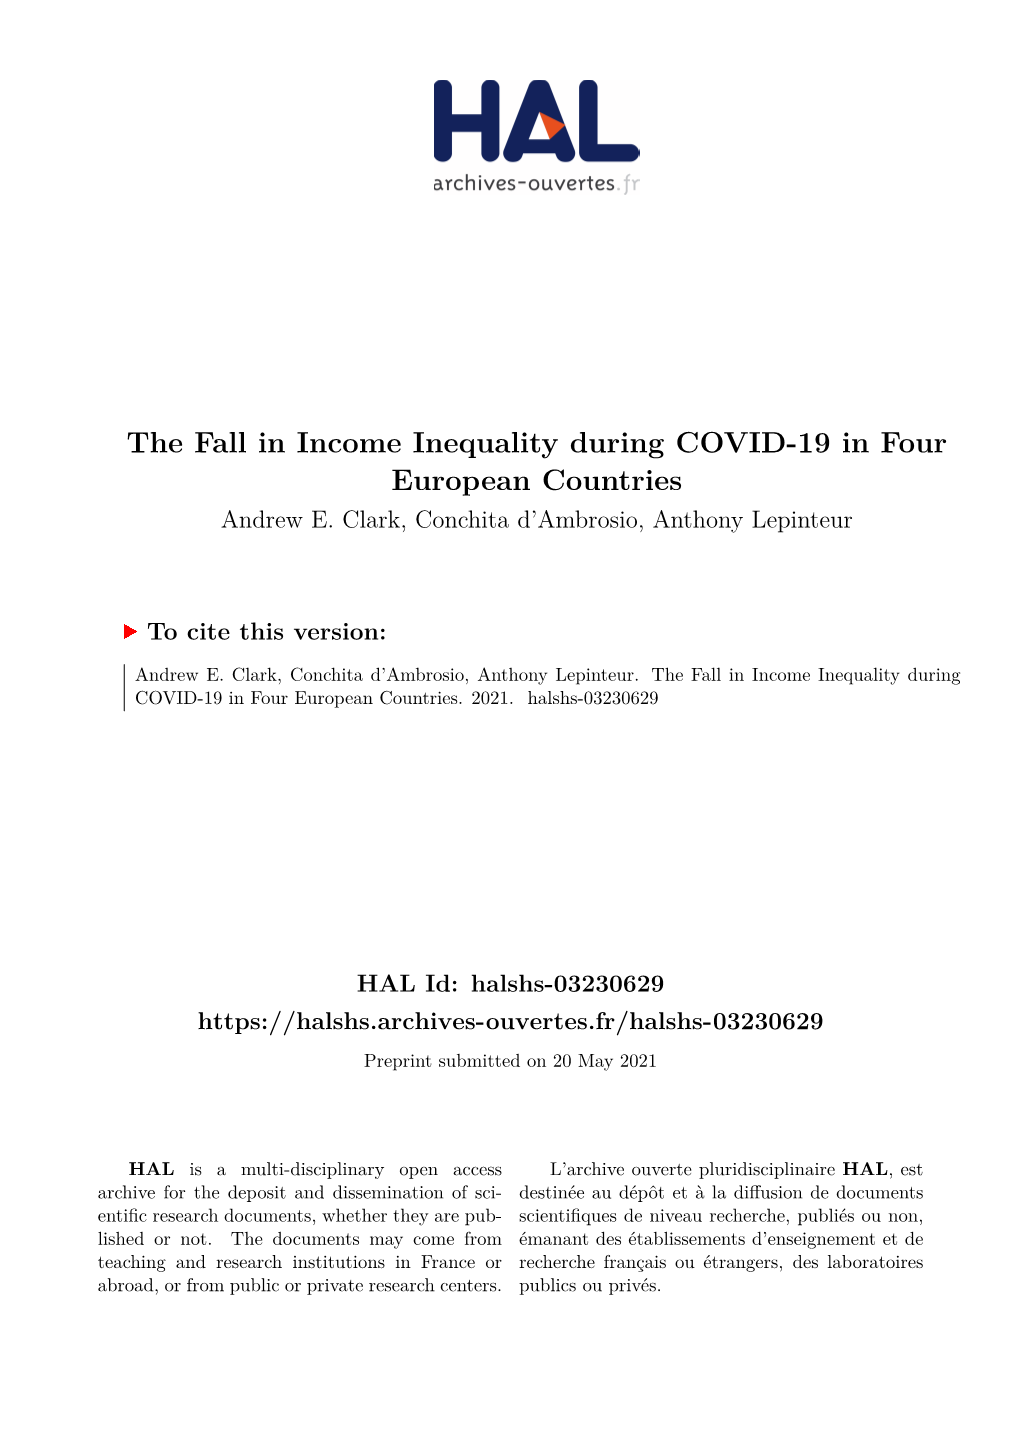 The Fall in Income Inequality During COVID-19 in Four European Countries Andrew E